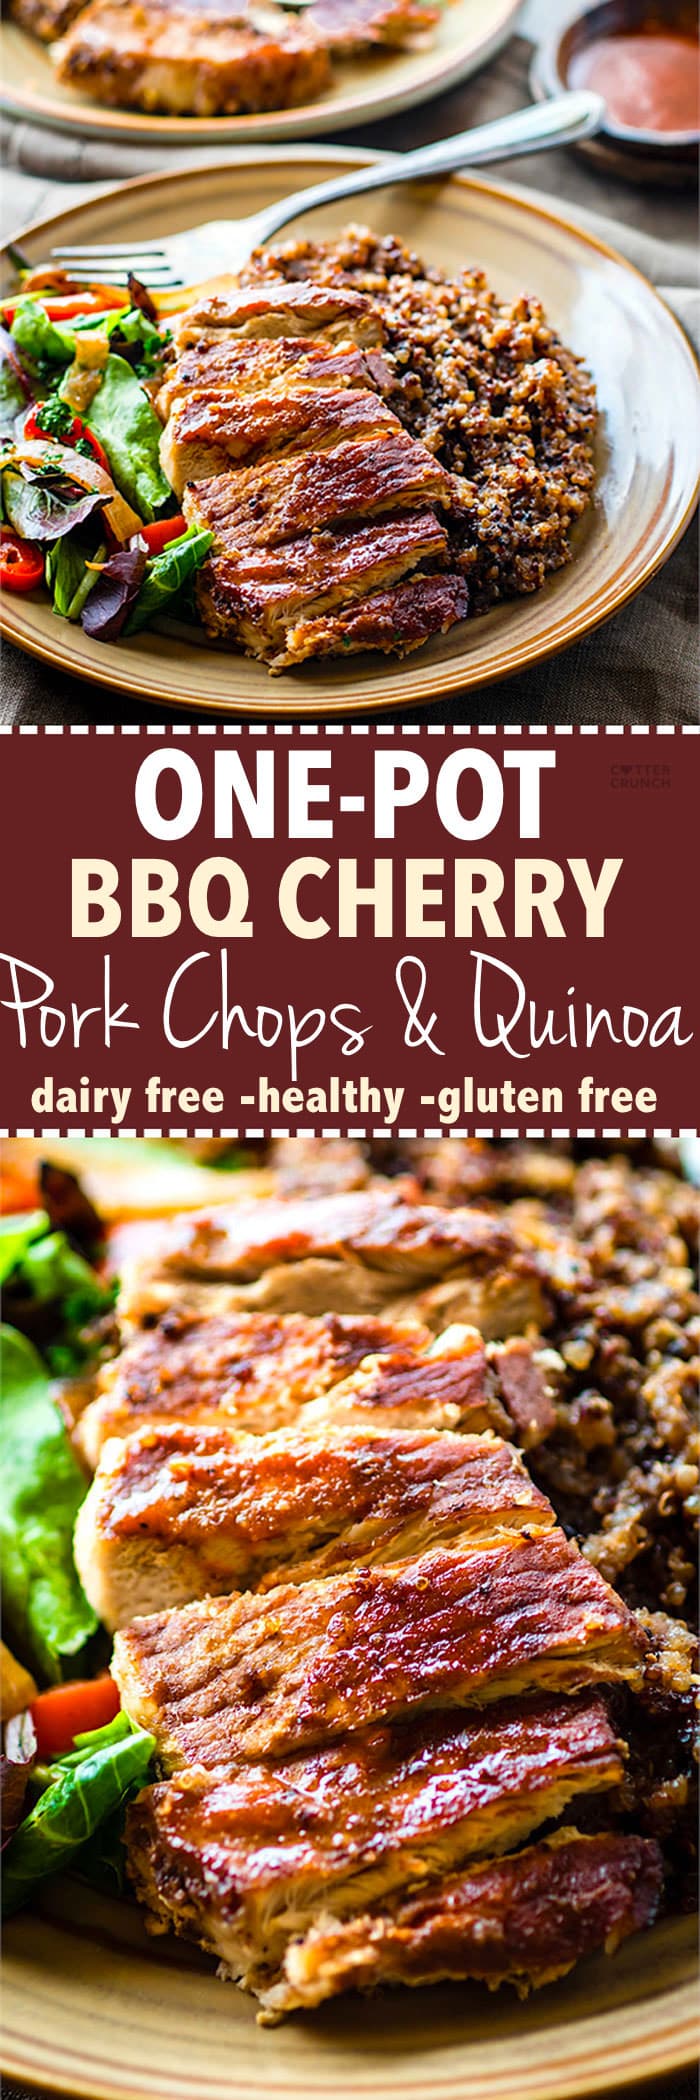 Easy Gluten free ONE-POT BBQ Cherry Pork Chops and Quinoa. A super simple gluten free one-pot meal that feeds the family. Finally, a healthy one-pot BBQ recipe that also makes a great recovery meal. It's balanced in carbs, protein, and healthy fats. Plus loaded with anti-inflammatory properties!